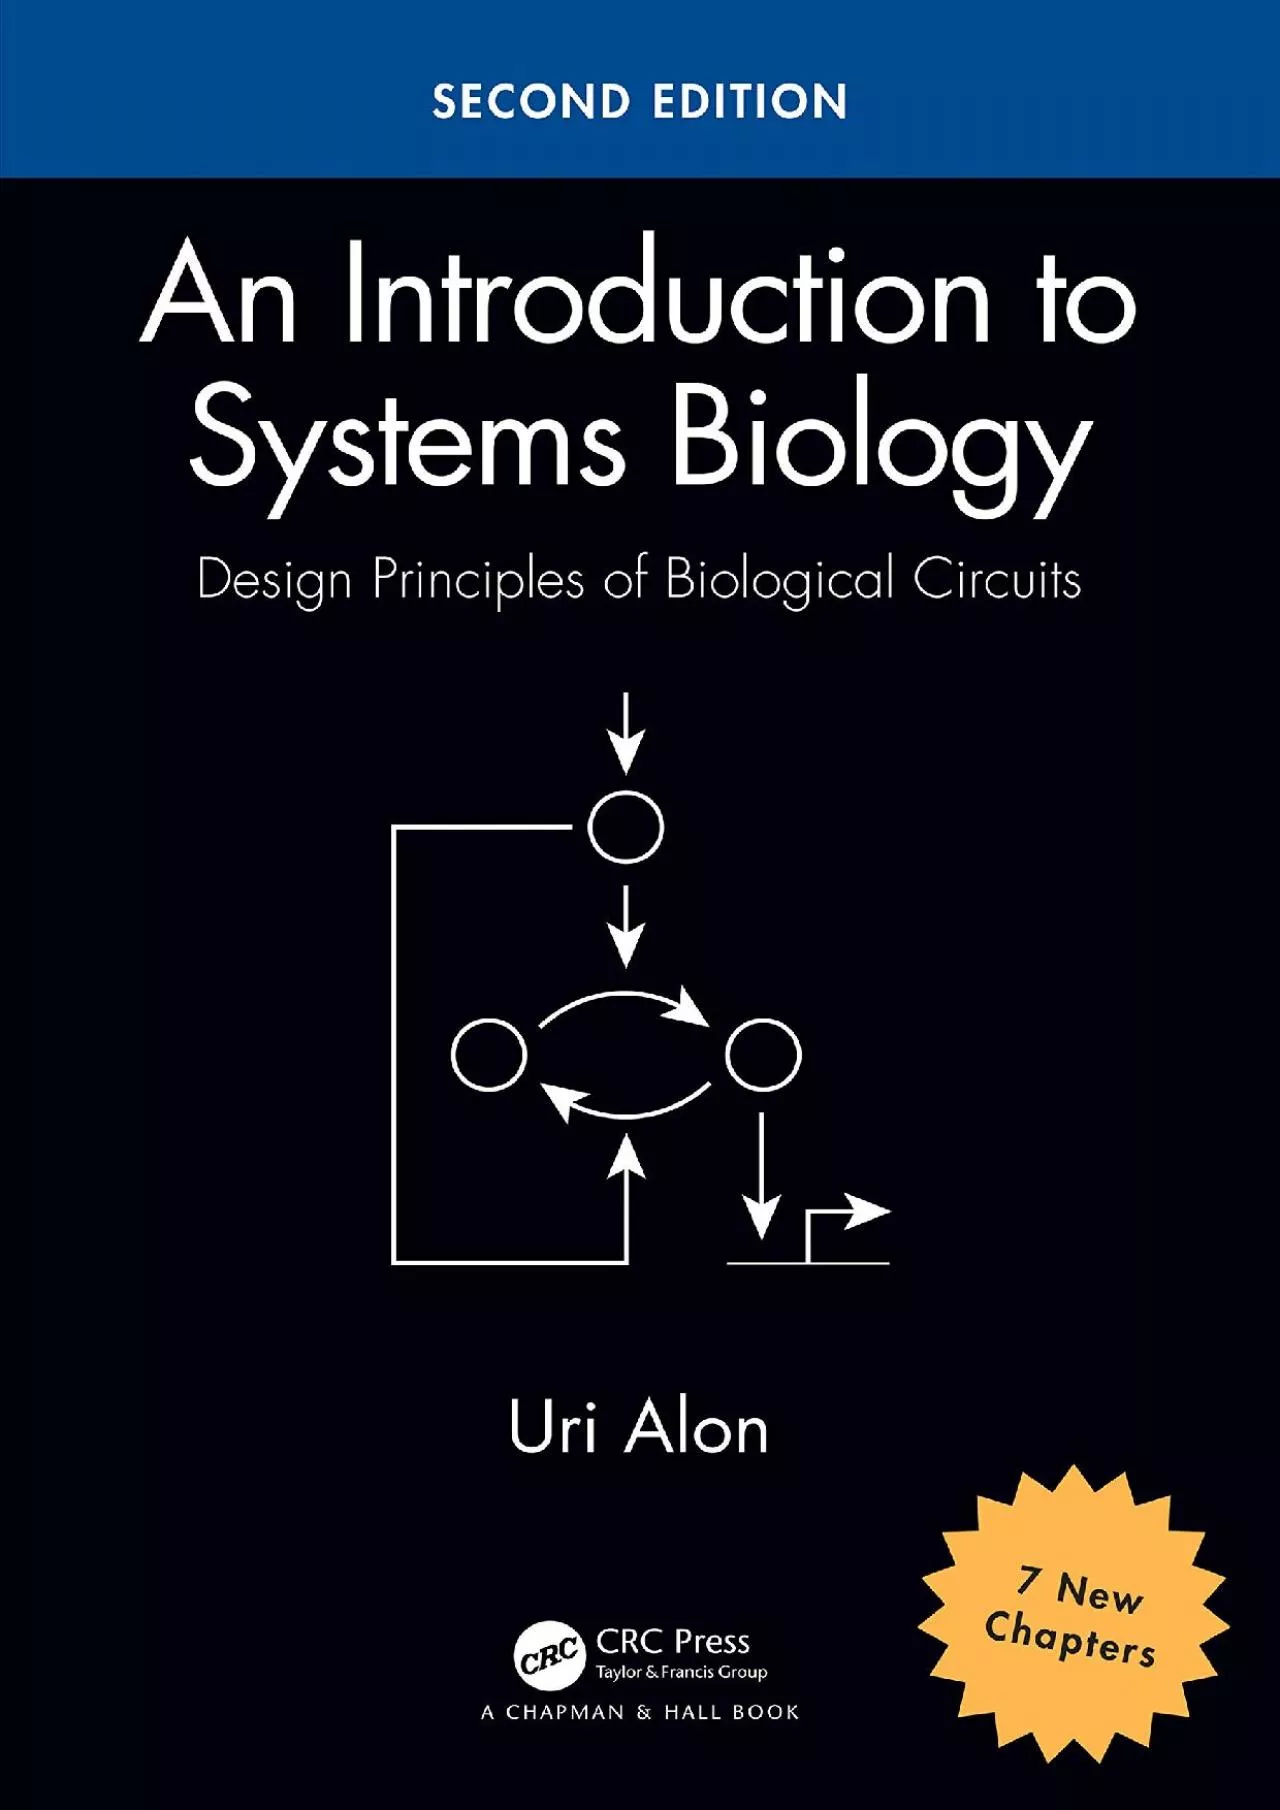 (BOOK)-An Introduction to Systems Biology (Chapman & Hall/CRC Computational Biology Series)